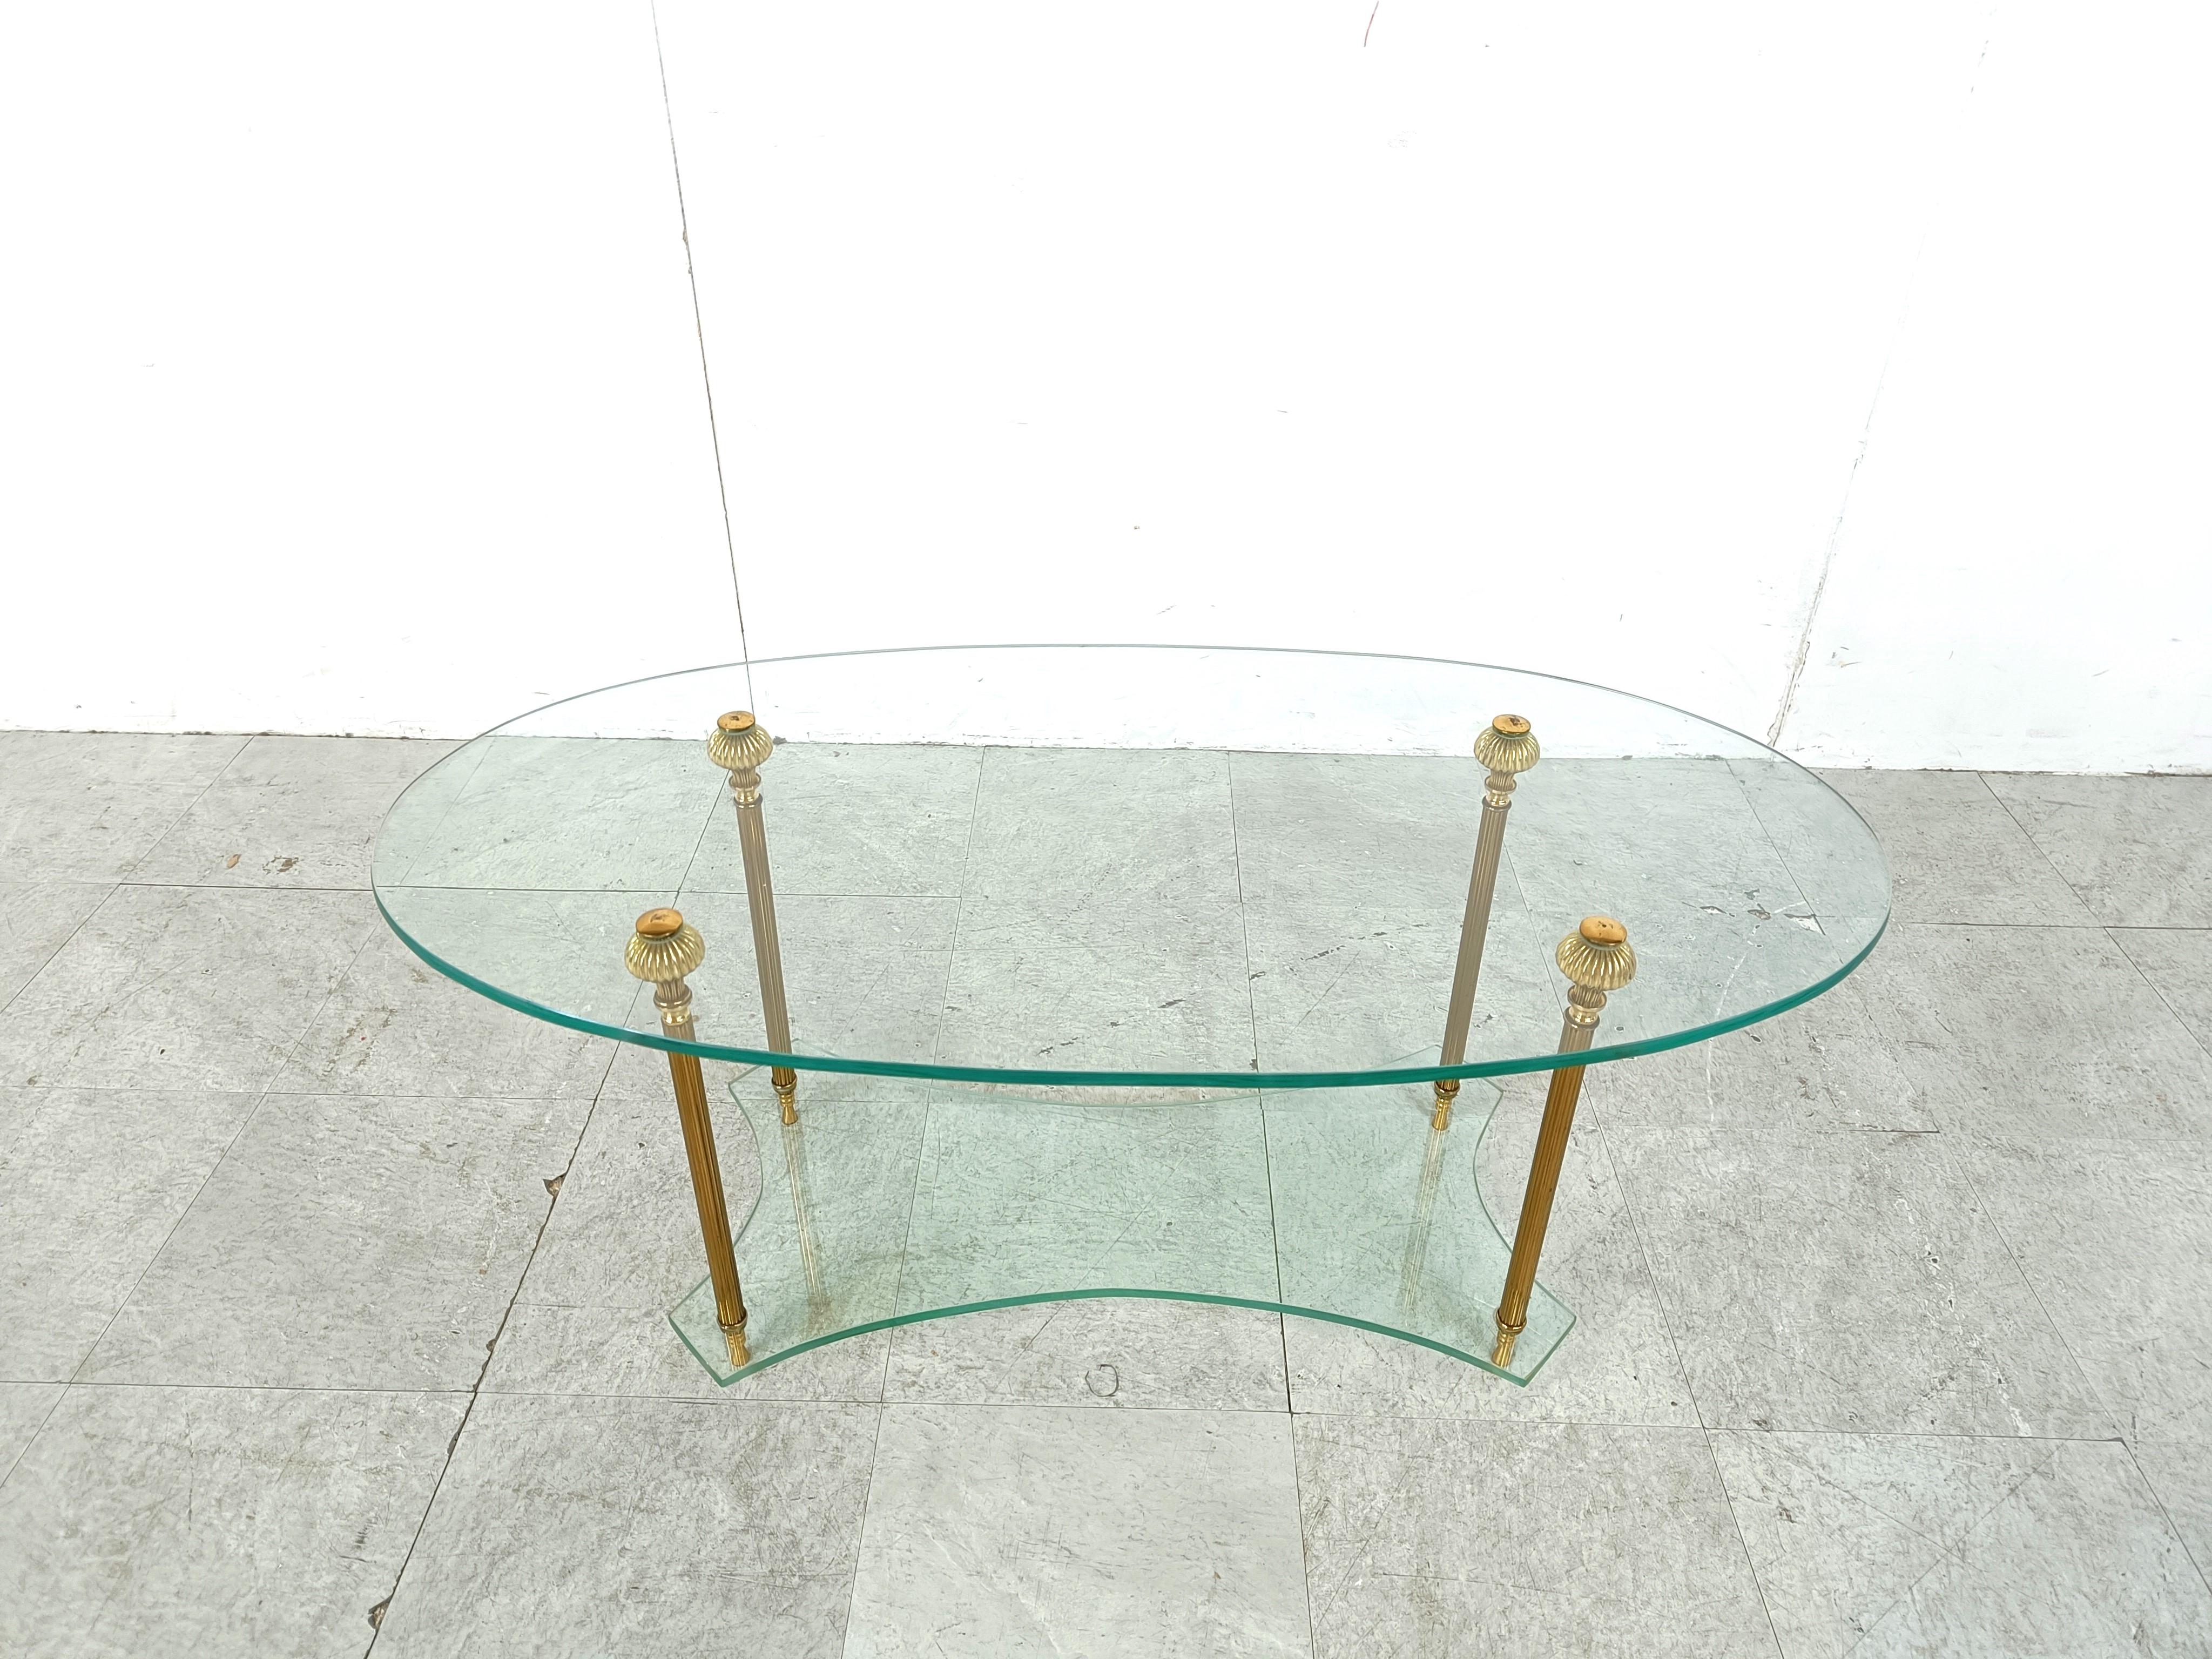 Vintage two tier oval glass coffee table with brass legs.

Neoclassical style brass hardware.

Very good condition

1970s - italy

Height: 43cm/16.92